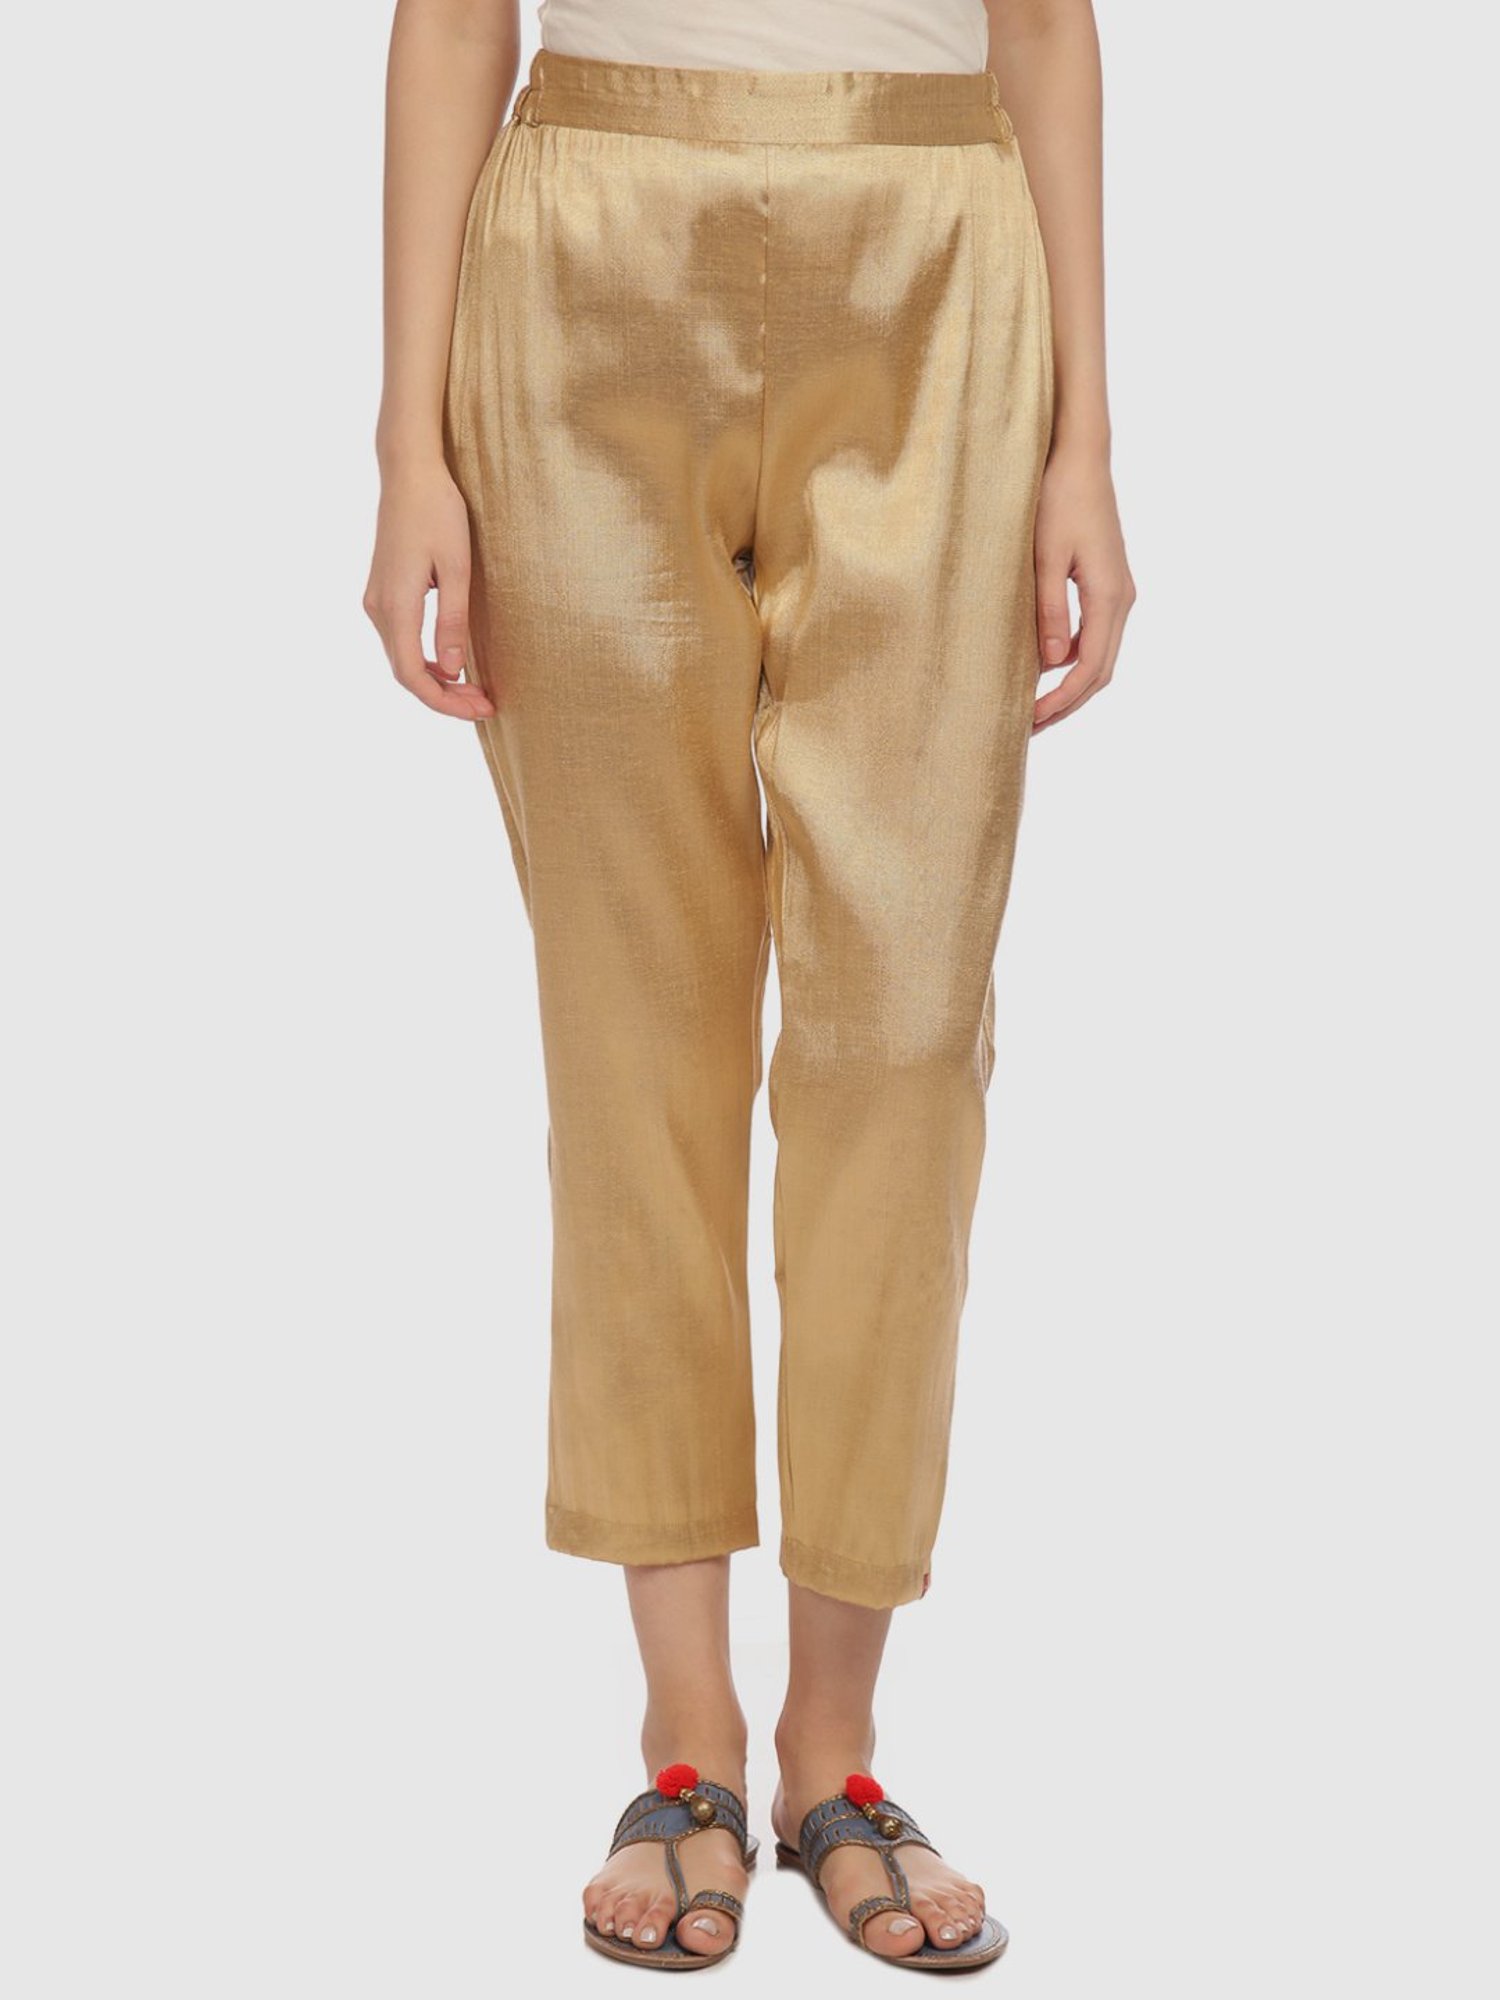 Buy Online Gold Straight Rayon Pants for Women  Girls at Best Prices in  Biba IndiaBOTTOMW17562AW21